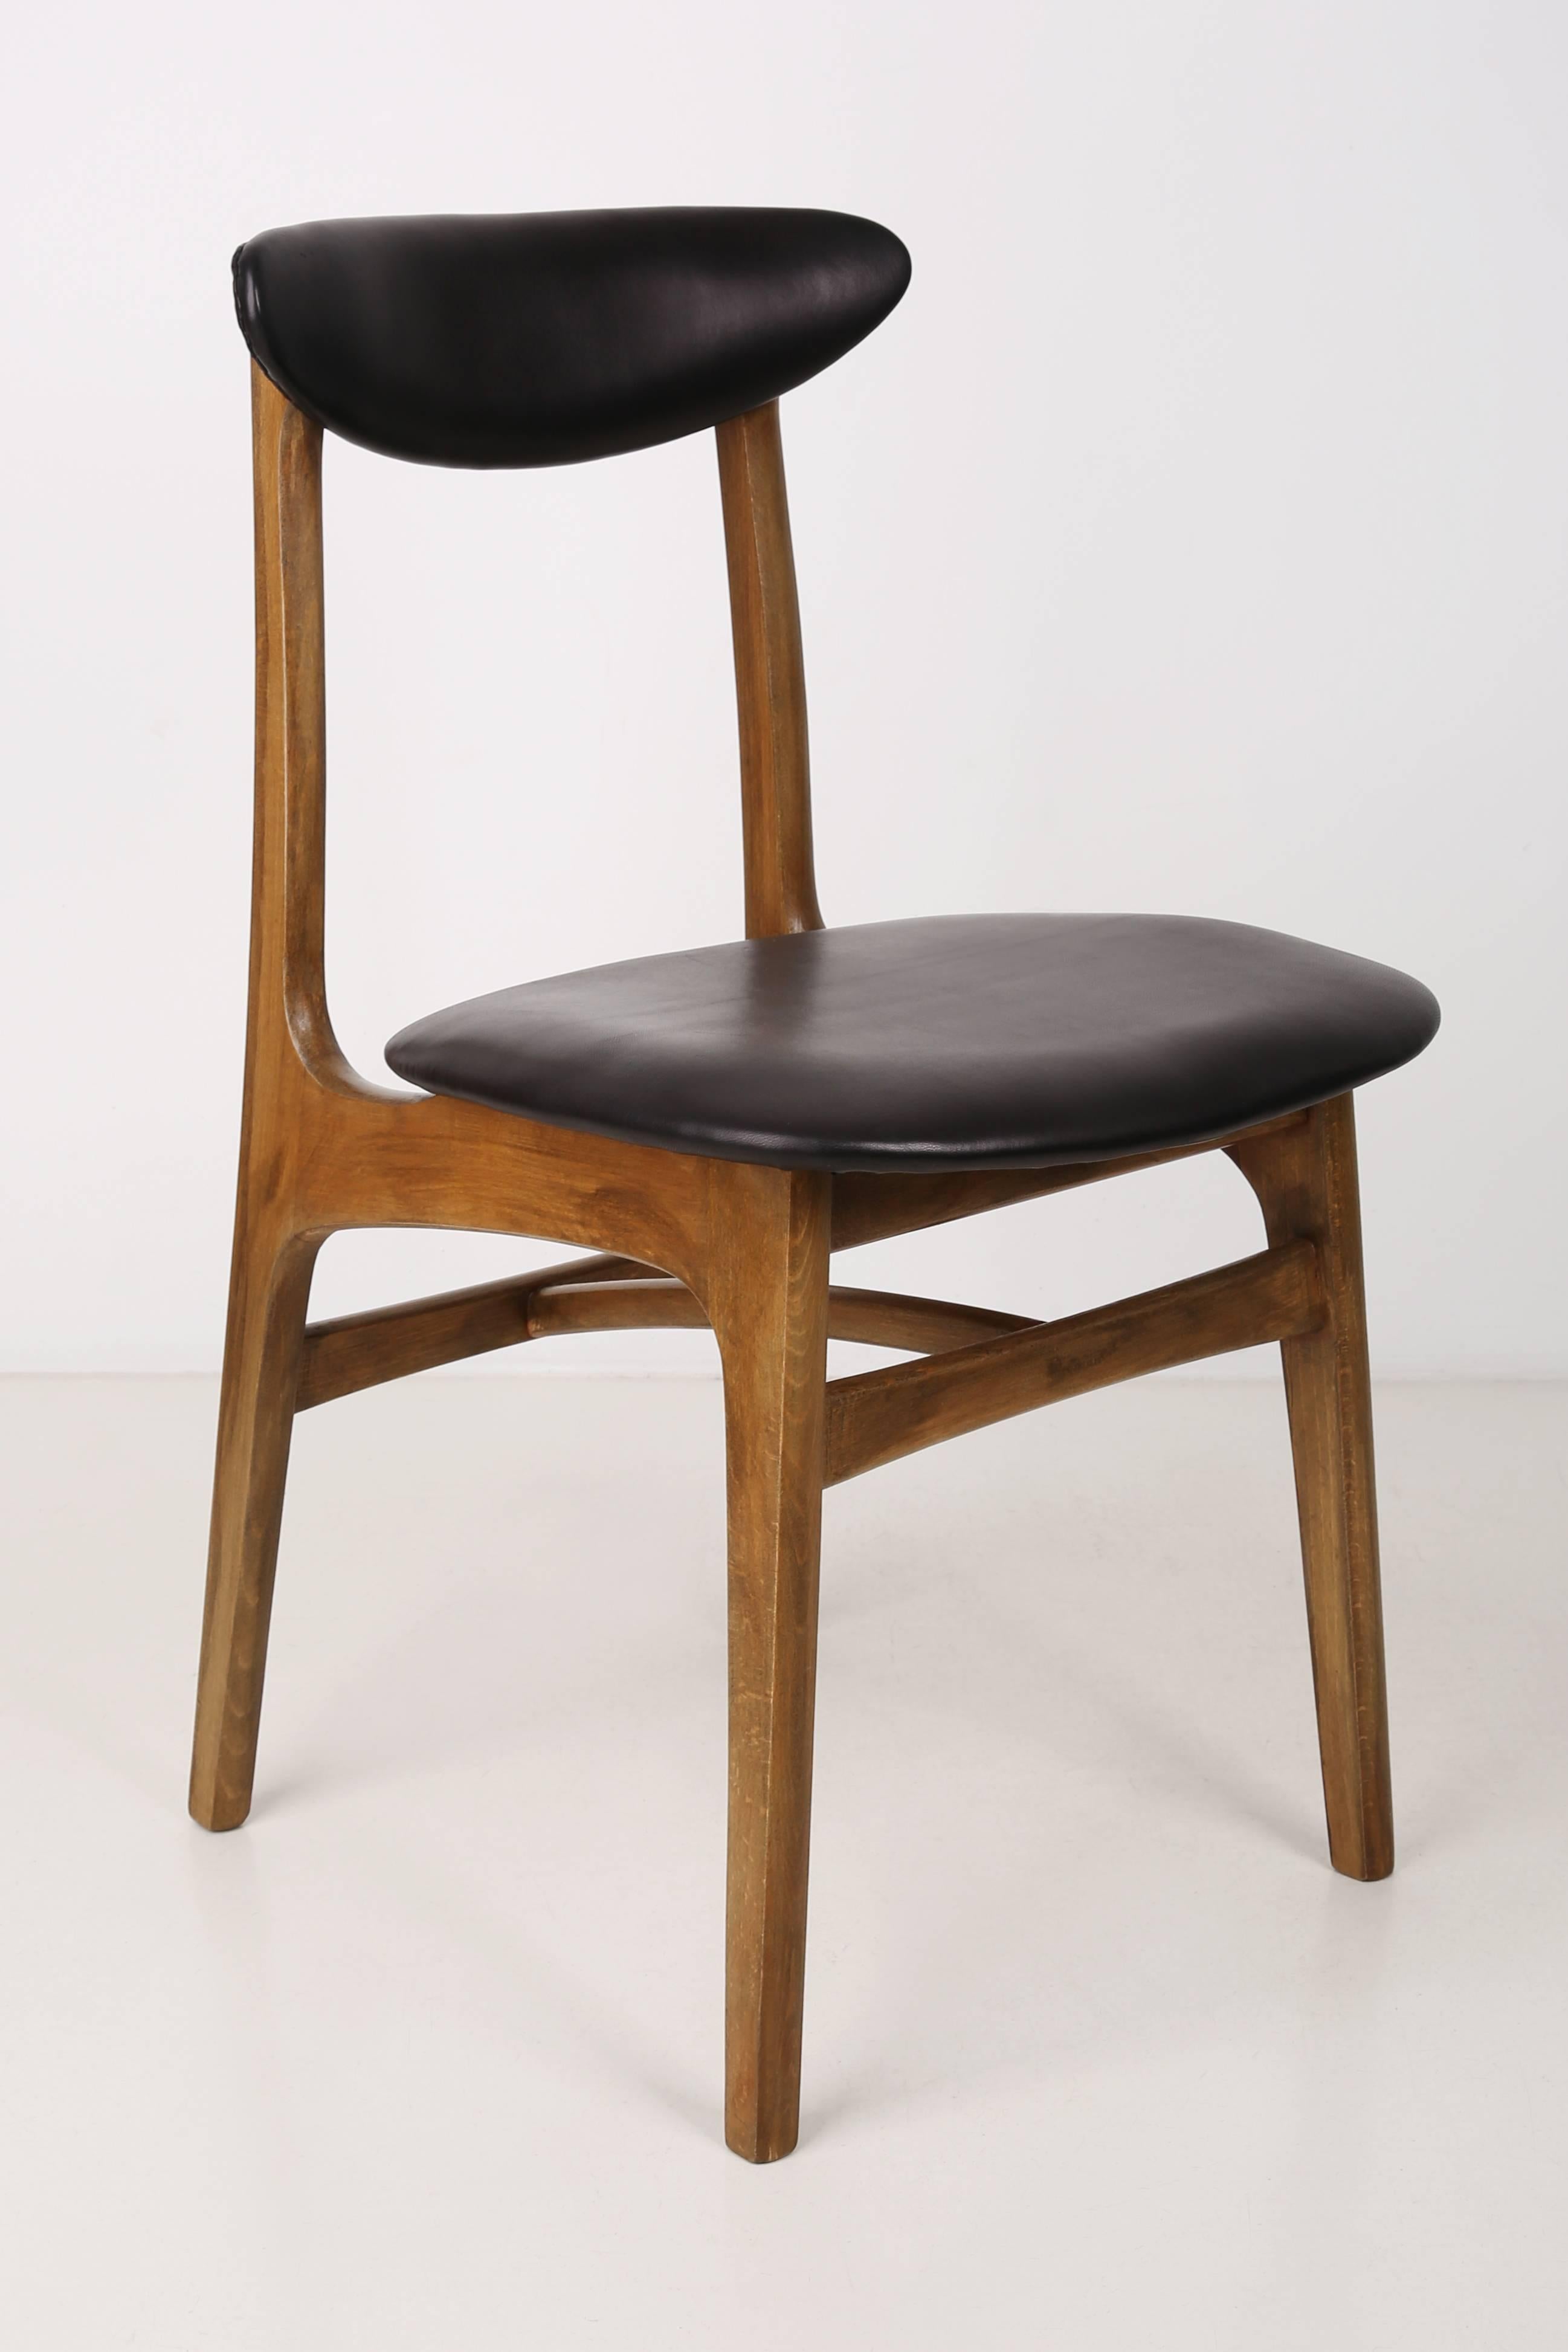 20th Century Set of Two Leather Mid Century Black Chairs, Europe, 1960s For Sale